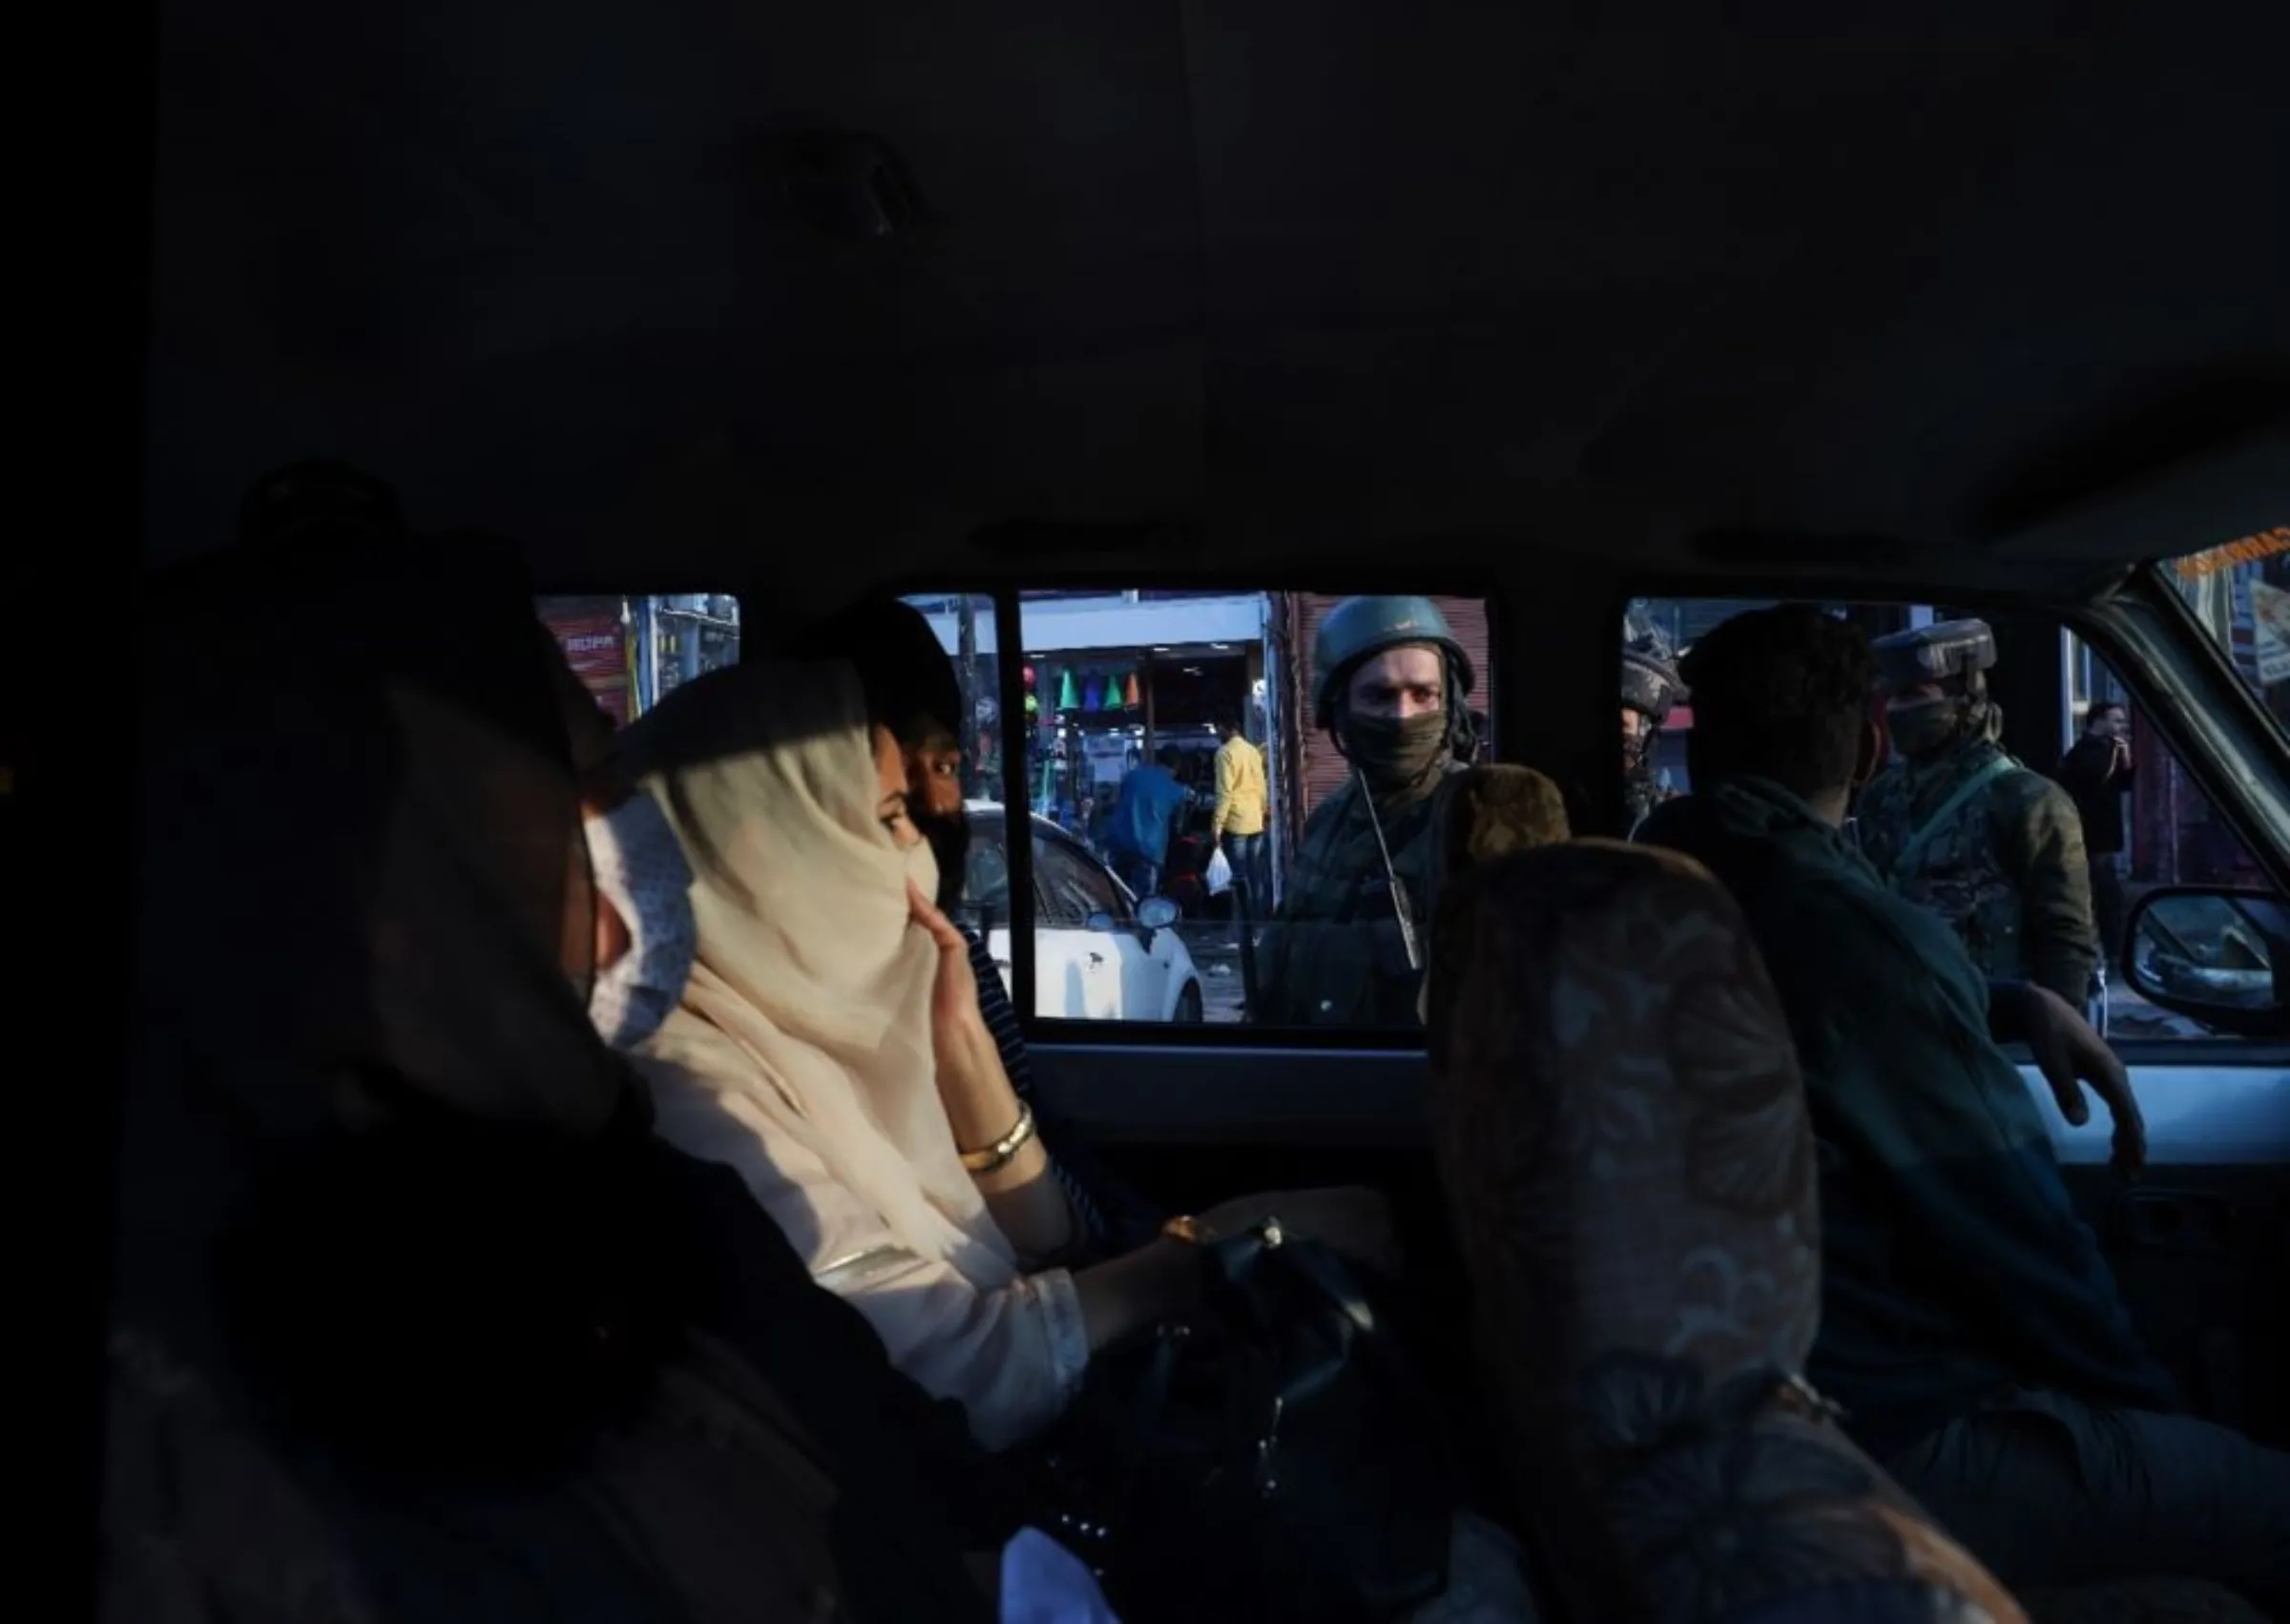 Security forces check the identification documents of passengers in a taxi in the Kashmiri city of Srinagar, India. ‎October ‎22, ‎2021